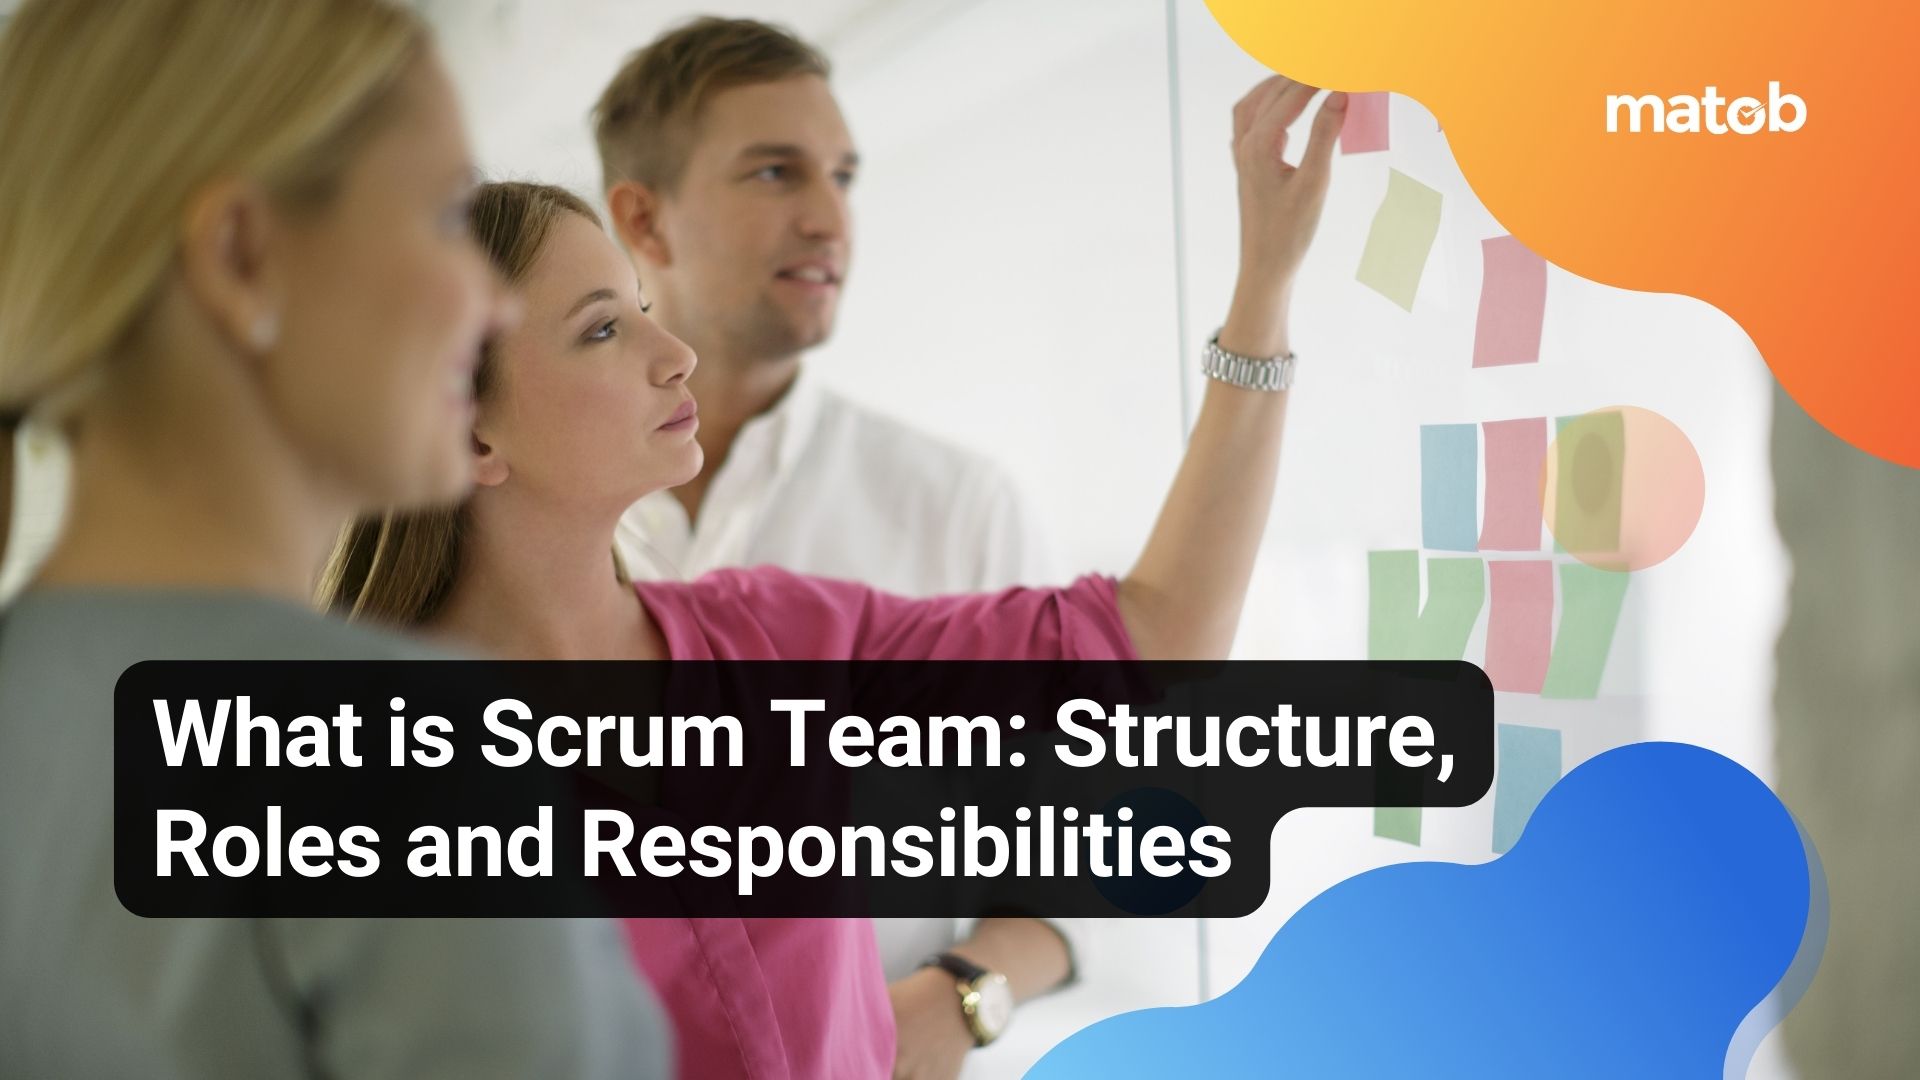 What is Scrum Team: Structure, Roles and Responsibilities